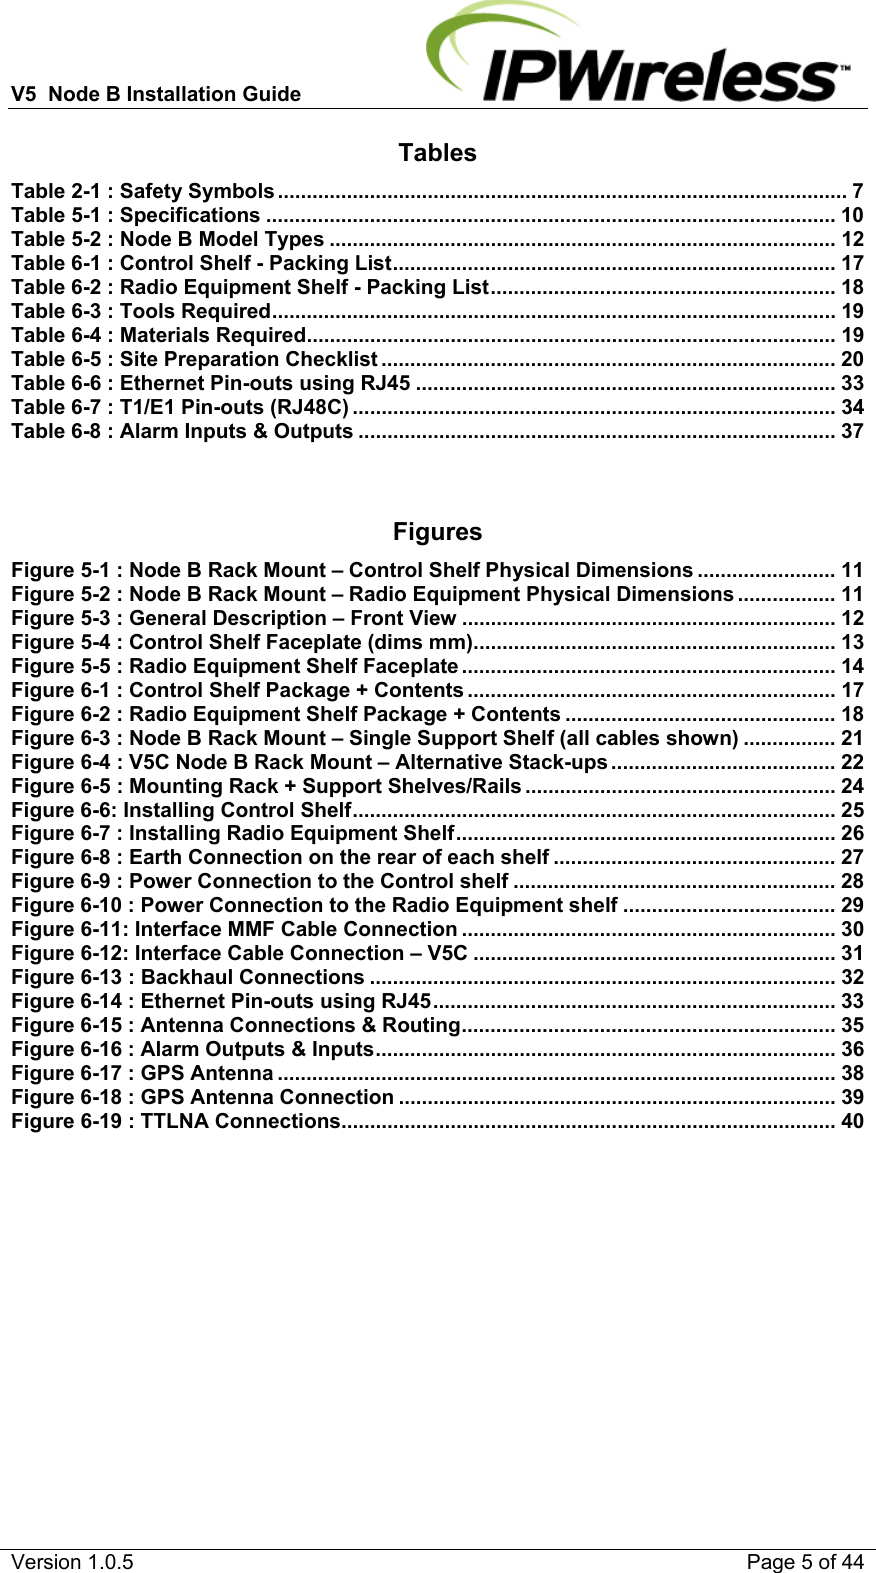 V5  Node B Installation Guide                           Version 1.0.5    Page 5 of 44 Tables Table 2-1 : Safety Symbols ................................................................................................... 7 Table 5-1 : Specifications ................................................................................................... 10 Table 5-2 : Node B Model Types ........................................................................................ 12 Table 6-1 : Control Shelf - Packing List .............................................................................  17 Table 6-2 : Radio Equipment Shelf - Packing List ............................................................ 18 Table 6-3 : Tools Required .................................................................................................. 19 Table 6-4 : Materials Required ............................................................................................ 19 Table 6-5 : Site Preparation Checklist ............................................................................... 20 Table 6-6 : Ethernet Pin-outs using RJ45 ......................................................................... 33 Table 6-7 : T1/E1 Pin-outs (RJ48C) .................................................................................... 34 Table 6-8 : Alarm Inputs &amp; Outputs ................................................................................... 37   Figures Figure 5-1 : Node B Rack Mount – Control Shelf Physical Dimensions ........................ 11 Figure 5-2 : Node B Rack Mount – Radio Equipment Physical Dimensions ................. 11 Figure 5-3 : General Description – Front View ................................................................. 12 Figure 5-4 : Control Shelf Faceplate (dims mm) ............................................................... 13 Figure 5-5 : Radio Equipment Shelf Faceplate ................................................................. 14 Figure 6-1 : Control Shelf Package + Contents ................................................................ 17 Figure 6-2 : Radio Equipment Shelf Package + Contents ............................................... 18 Figure 6-3 : Node B Rack Mount – Single Support Shelf (all cables shown) ................ 21 Figure 6-4 : V5C Node B Rack Mount – Alternative Stack-ups ....................................... 22 Figure 6-5 : Mounting Rack + Support Shelves/Rails ...................................................... 24 Figure 6-6: Installing Control Shelf ....................................................................................  25 Figure 6-7 : Installing Radio Equipment Shelf .................................................................. 26 Figure 6-8 : Earth Connection on the rear of each shelf ................................................. 27 Figure 6-9 : Power Connection to the Control shelf ........................................................ 28 Figure 6-10 : Power Connection to the Radio Equipment shelf ..................................... 29 Figure 6-11: Interface MMF Cable Connection ................................................................. 30 Figure 6-12: Interface Cable Connection – V5C ............................................................... 31 Figure 6-13 : Backhaul Connections ................................................................................. 32 Figure 6-14 : Ethernet Pin-outs using RJ45 ...................................................................... 33 Figure 6-15 : Antenna Connections &amp; Routing ................................................................. 35 Figure 6-16 : Alarm Outputs &amp; Inputs ................................................................................  36 Figure 6-17 : GPS Antenna ................................................................................................. 38 Figure 6-18 : GPS Antenna Connection ............................................................................ 39 Figure 6-19 : TTLNA Connections ...................................................................................... 40   